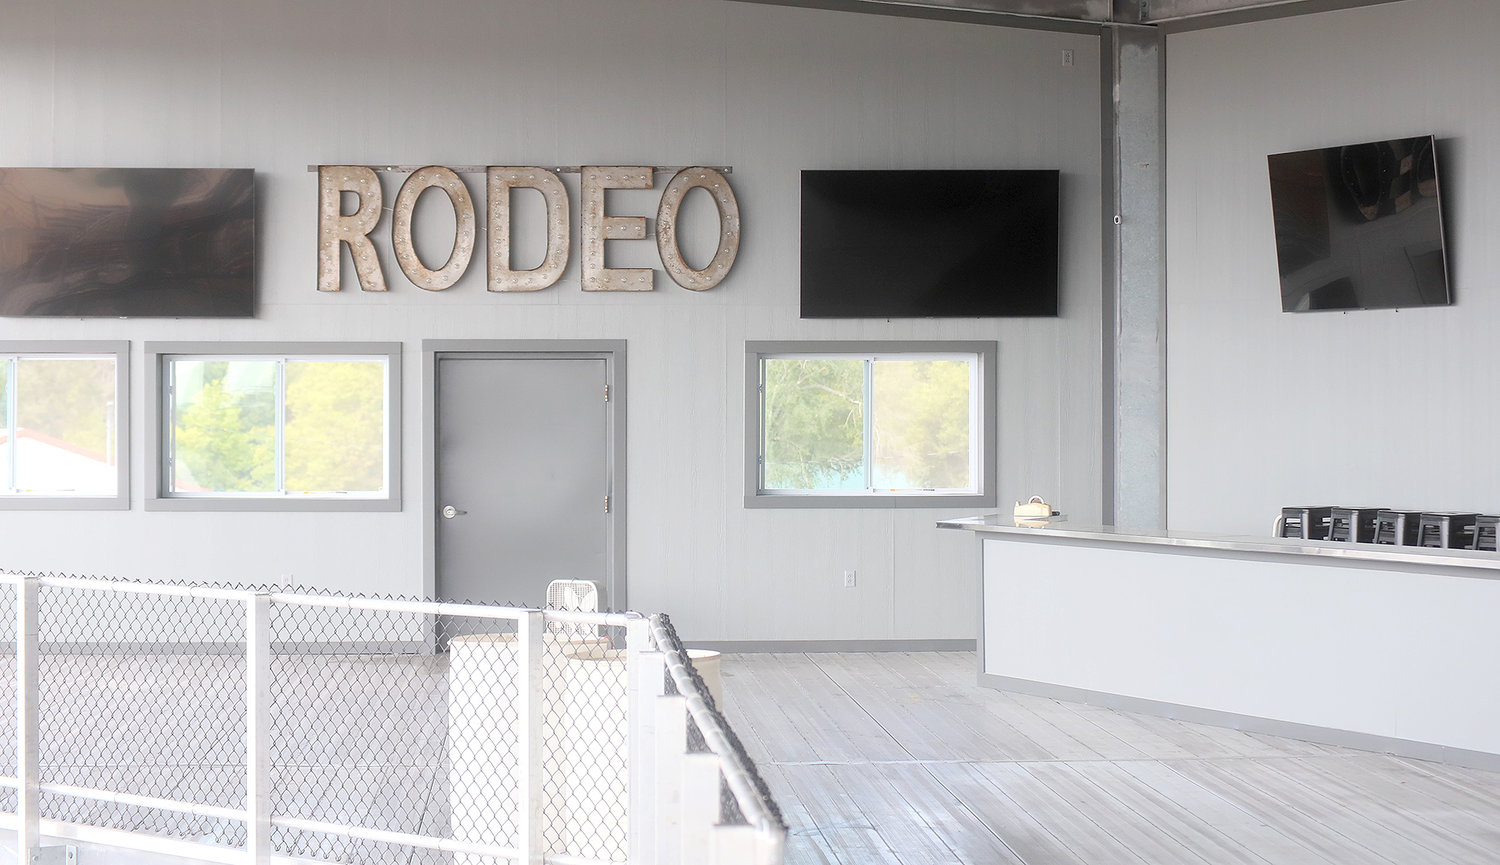 85" big screen television will livestream the rodeo this year and carry local sports programming during the rodeo in the VIP expansion area.